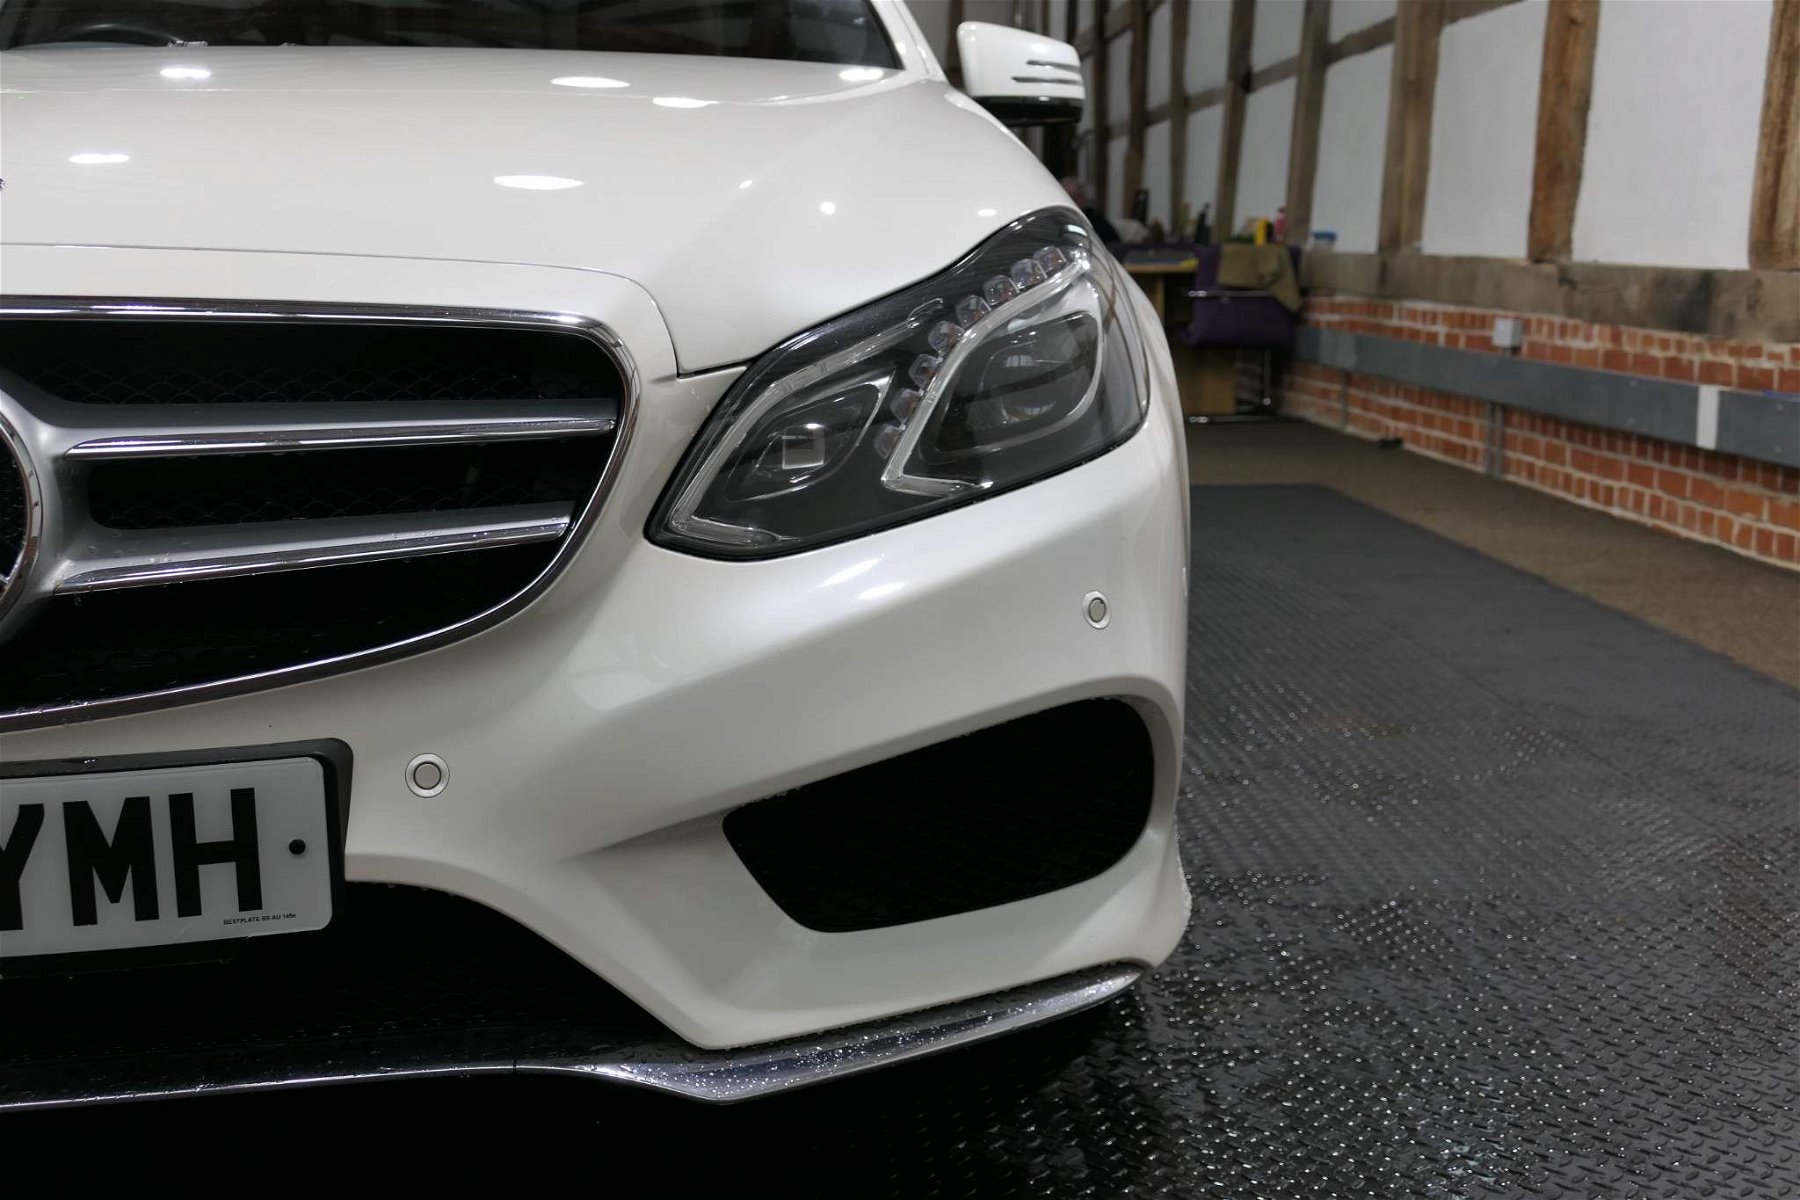 Mercedes E Class for sale in Basingstoke - Part Exchange Welcome